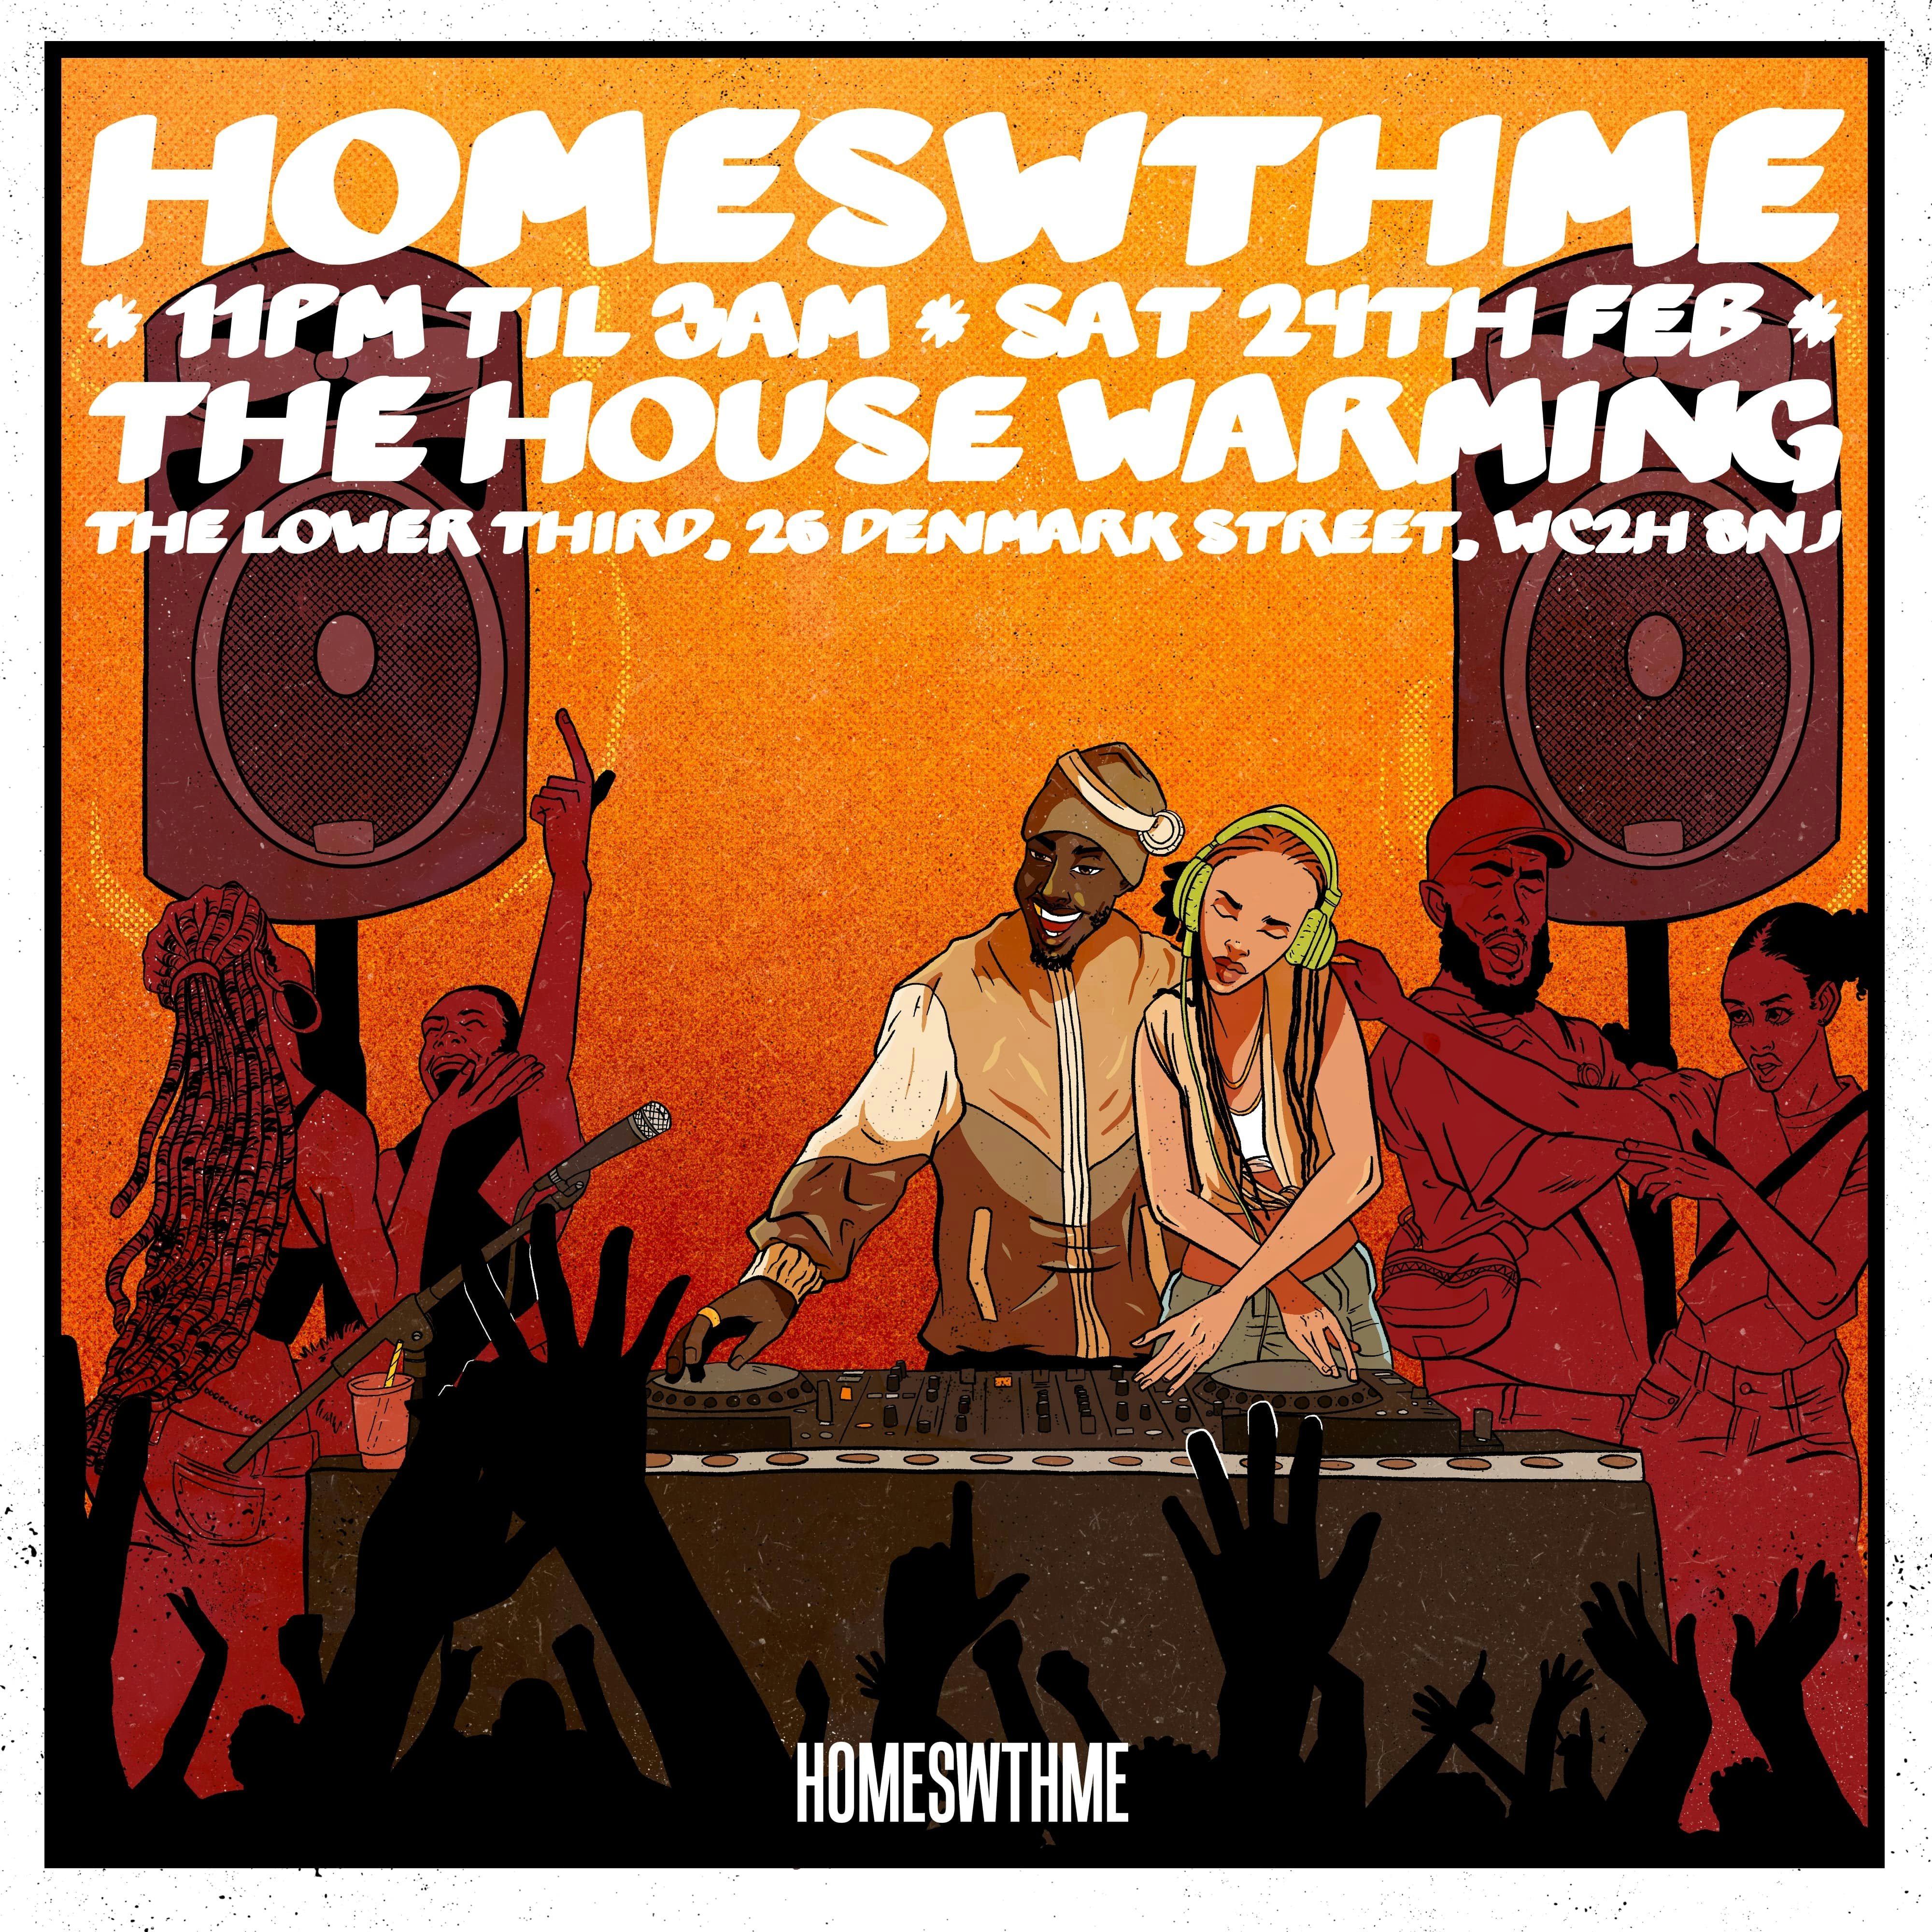 HOMESWTHME: the house warming at The Lower Third